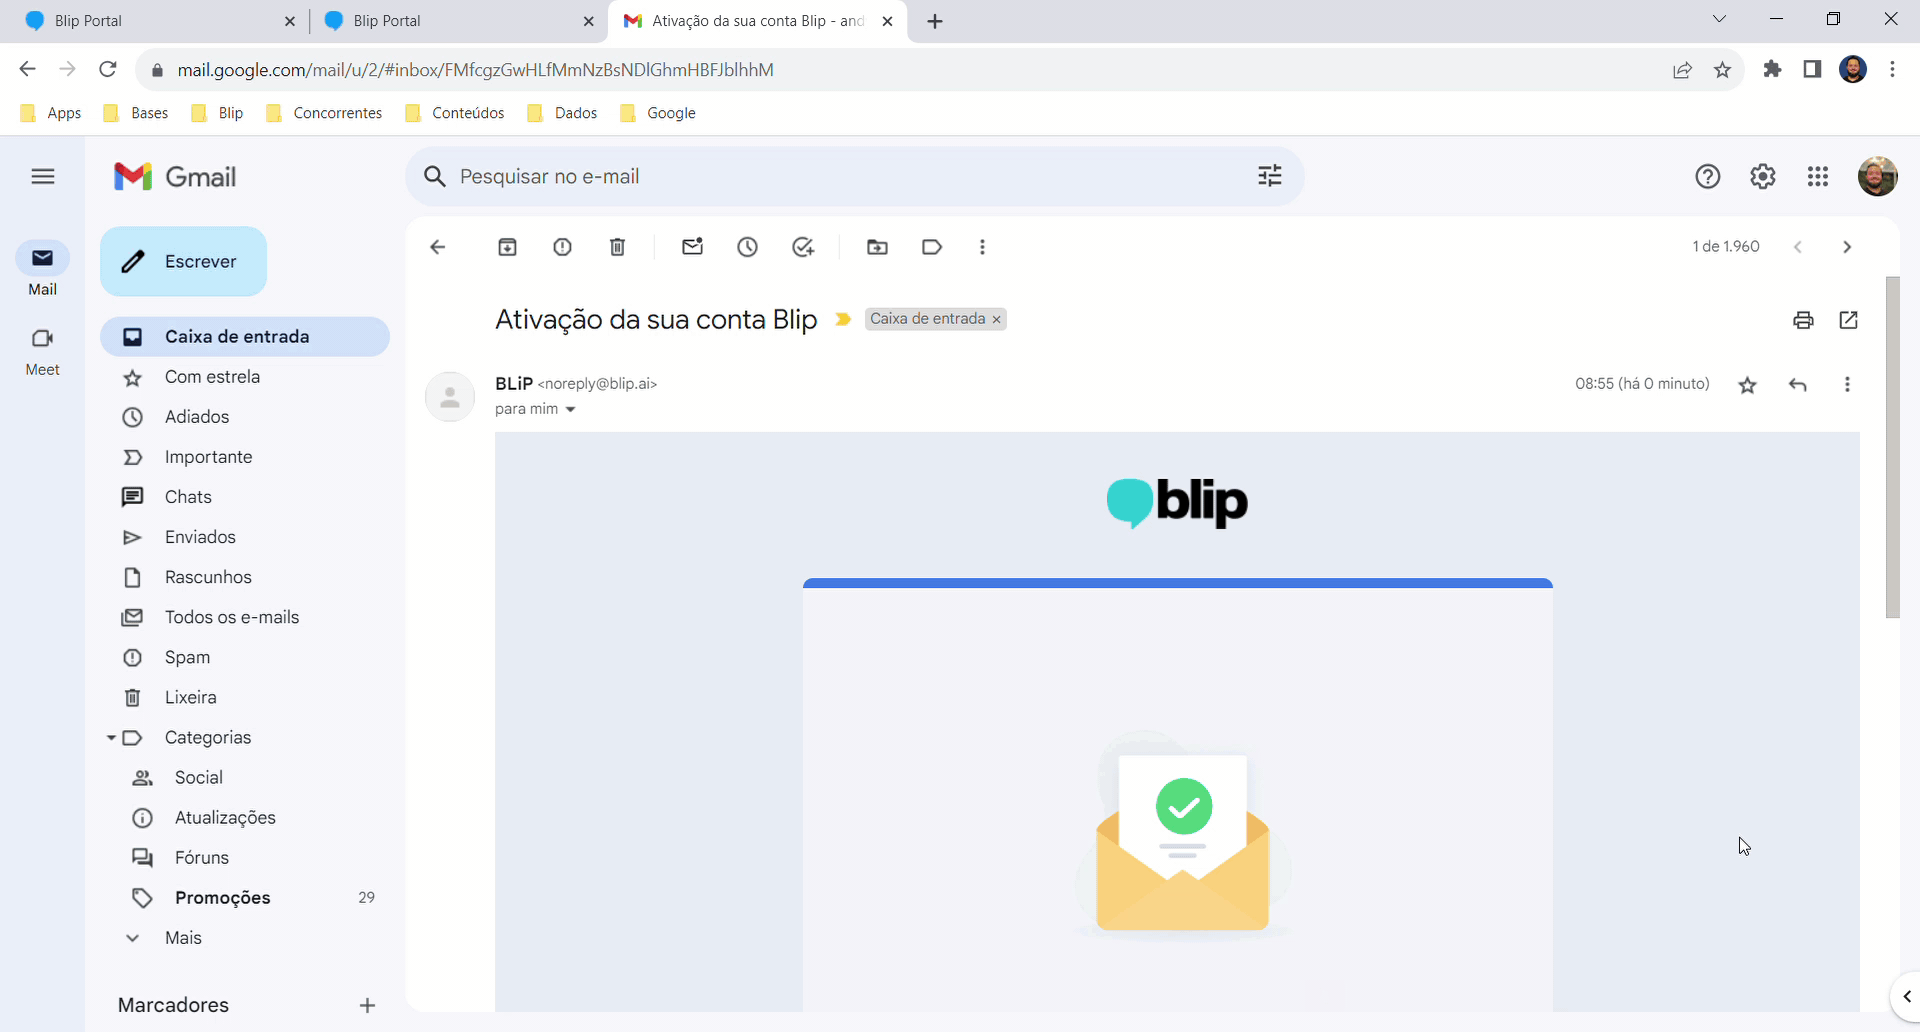 How to connect your own application through Portal – Blip